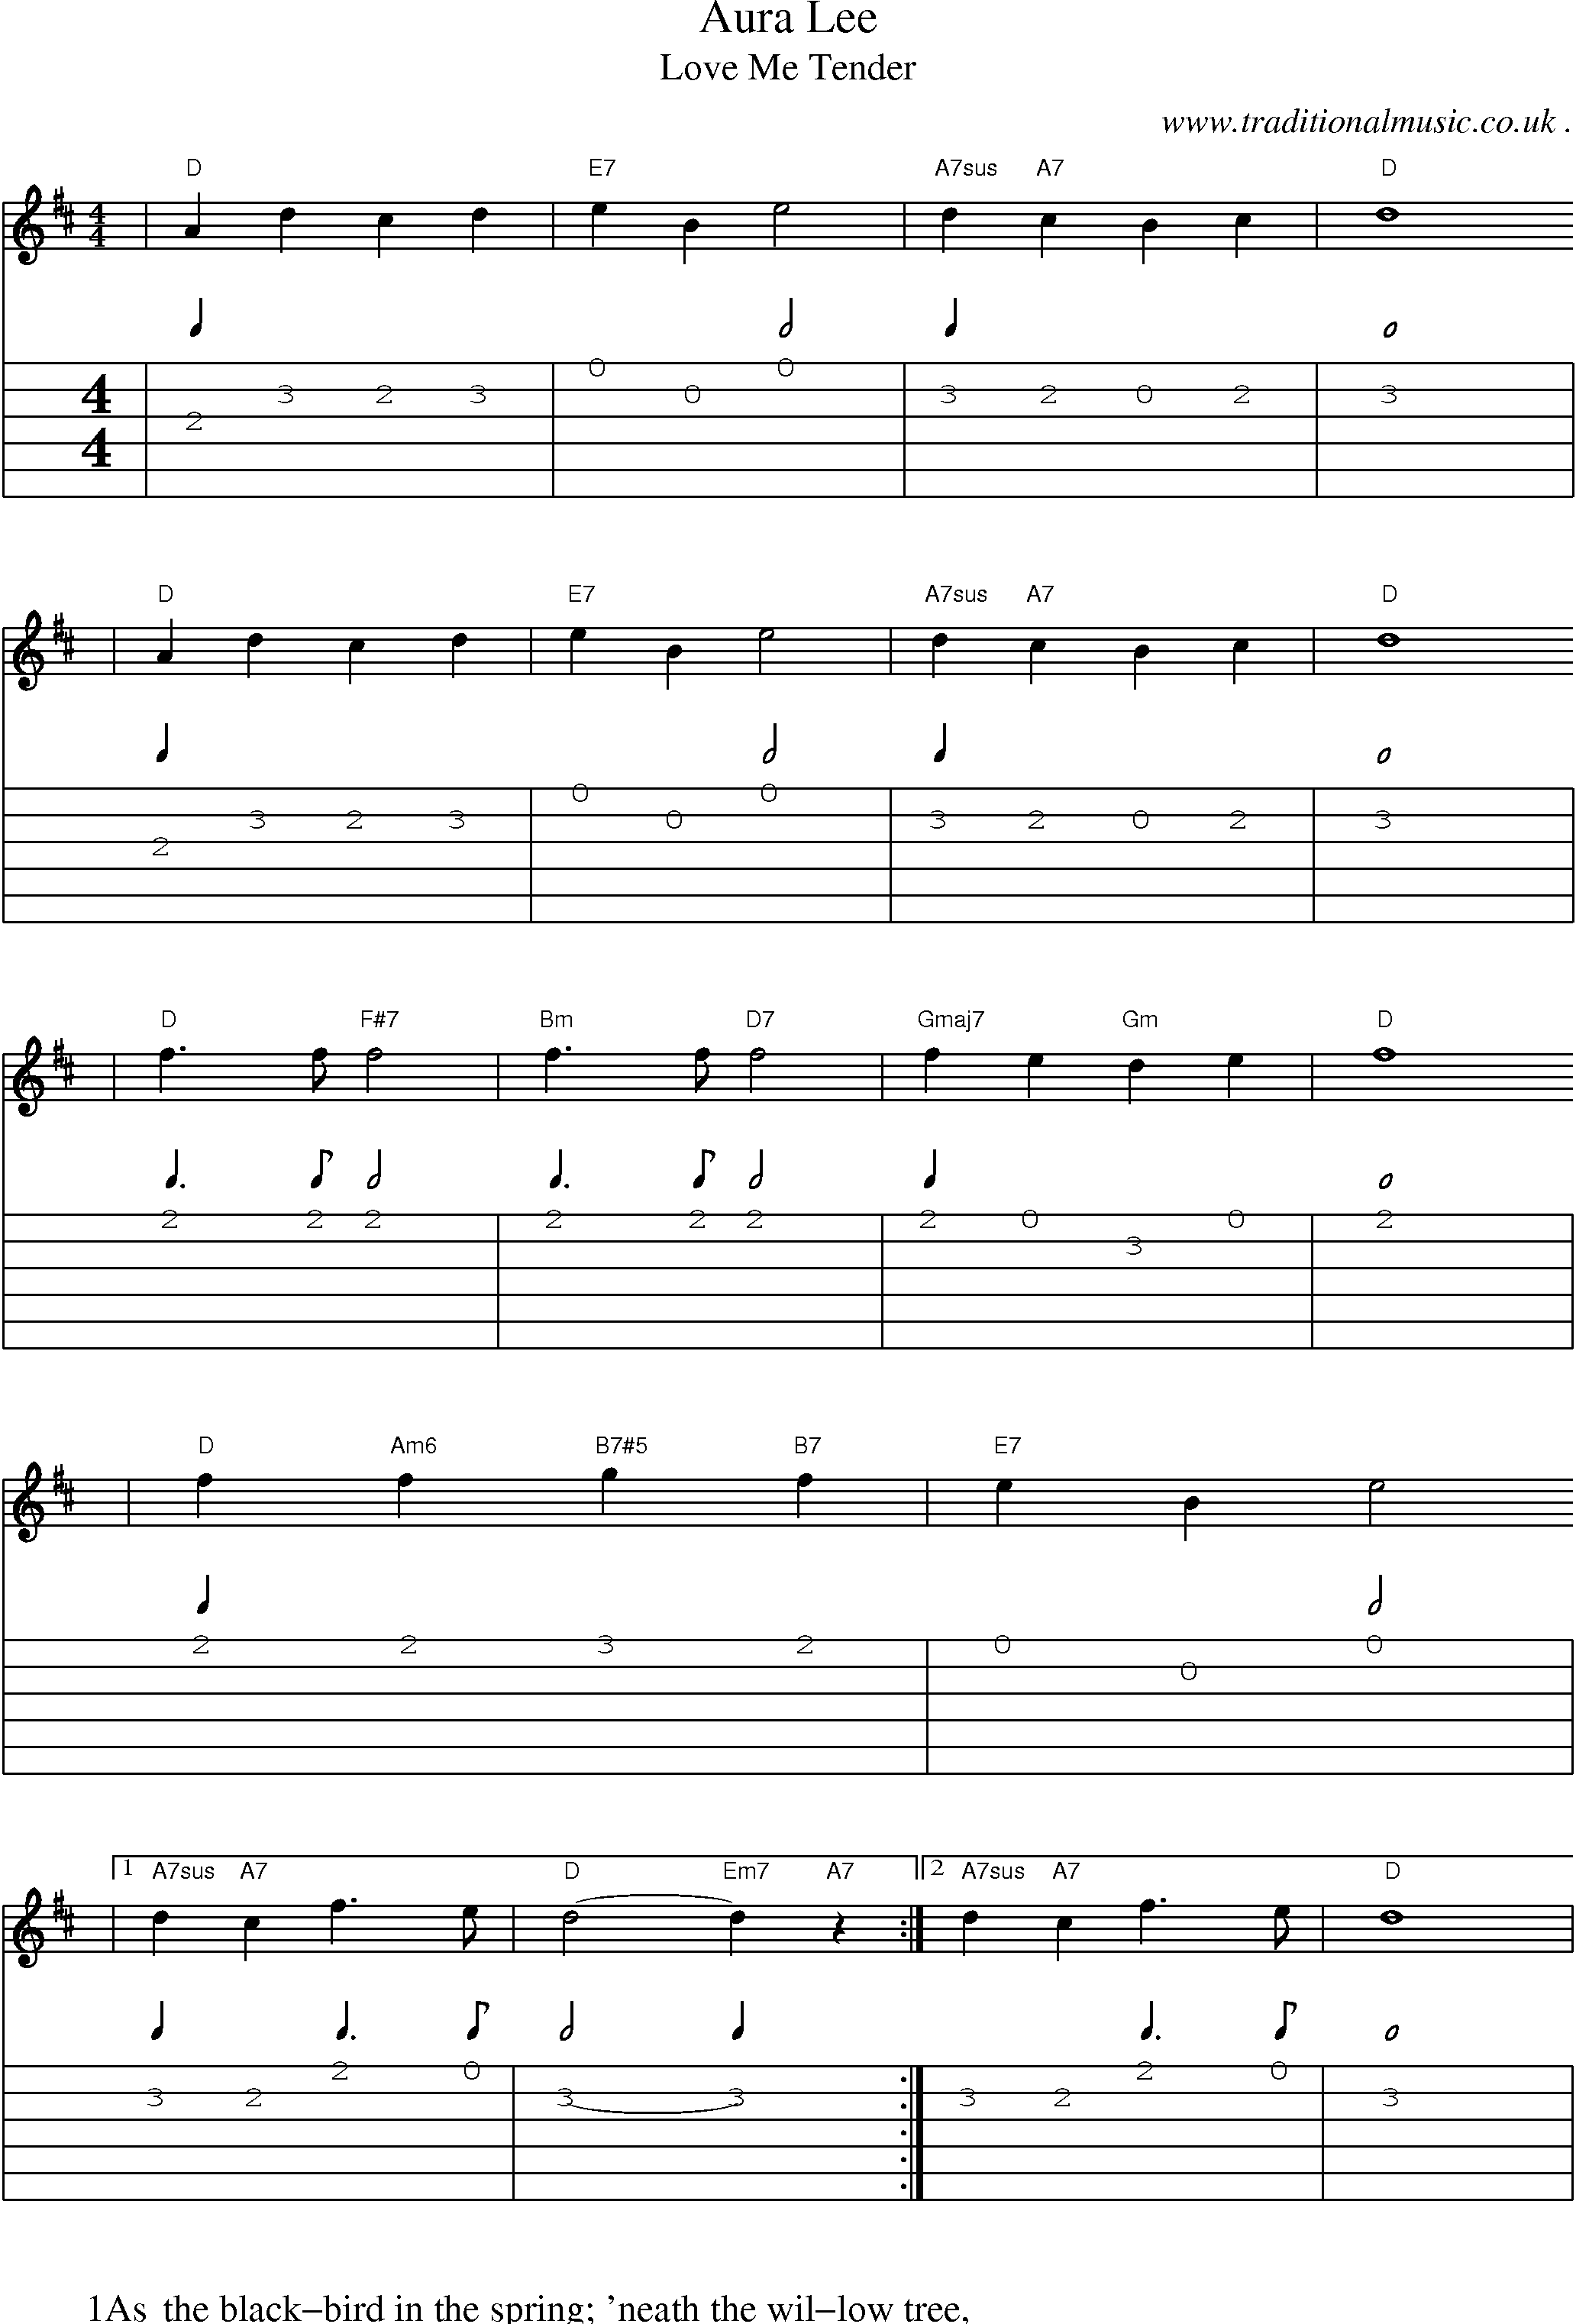 Music Score and Guitar Tabs for Aura Lee